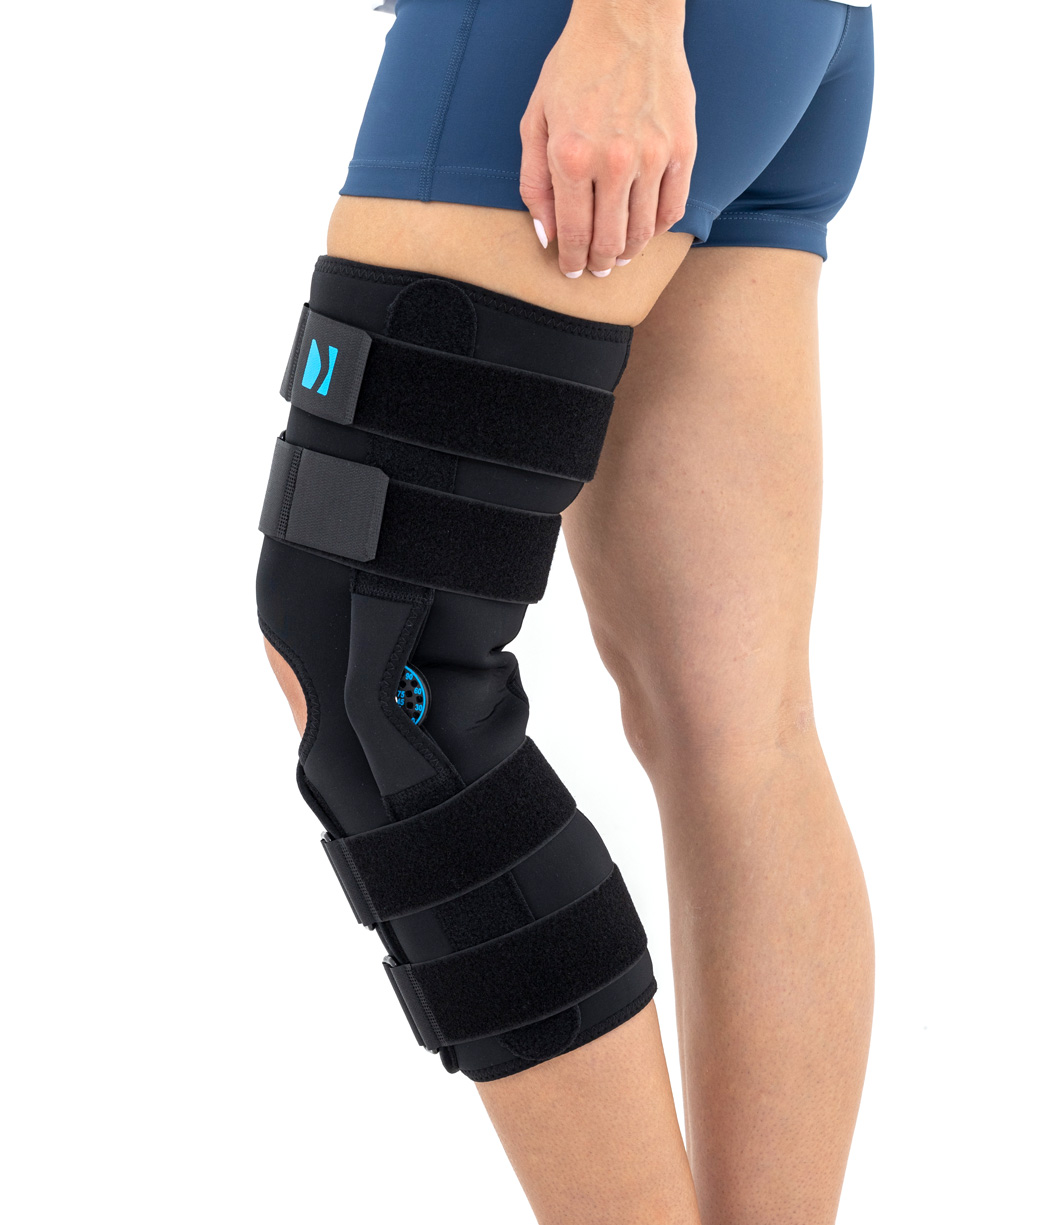 Lower-extremity support AM-OSK-OL/1R  Reh4Mat – lower limb orthosis and  braces - Manufacturer of modern orthopaedic devices